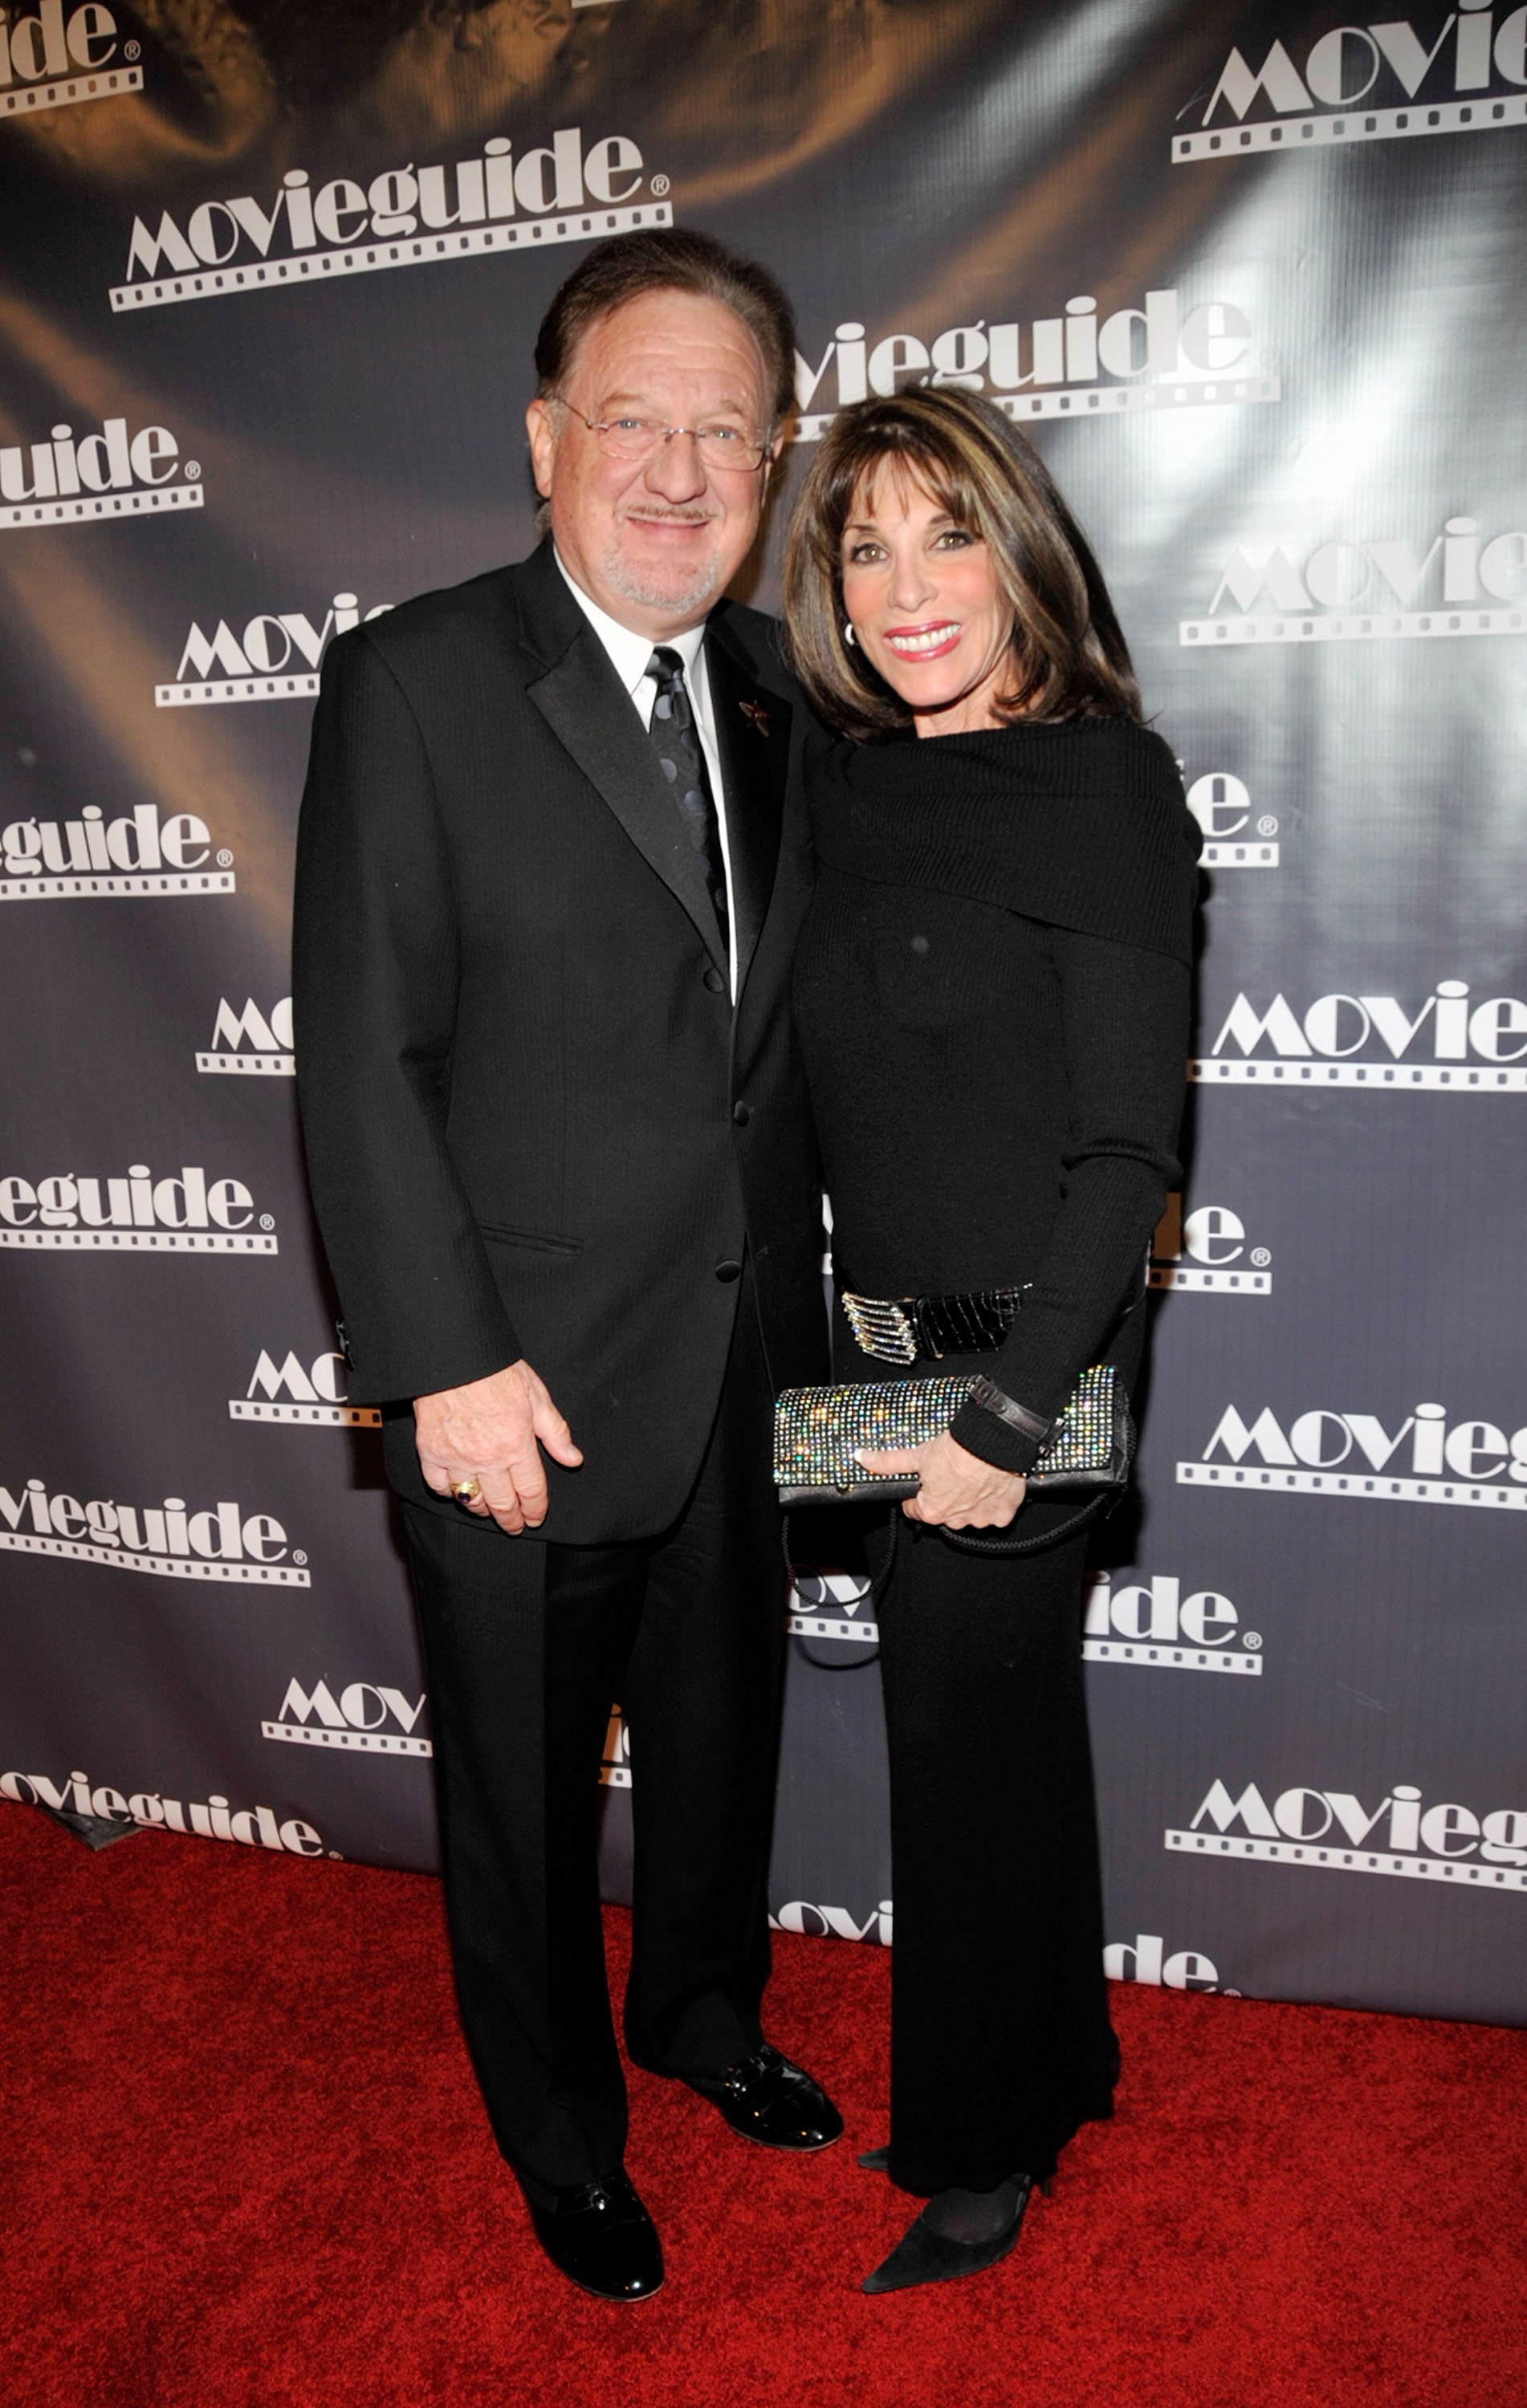 Professor Ronald Linder and his wife Kate Linder during the 17th Annual Movieguide Faith And Values Awards Gala at the Beverly Hills Hotel on February 11, 2009 in Beverly Hills, California. / Source: Getty Images